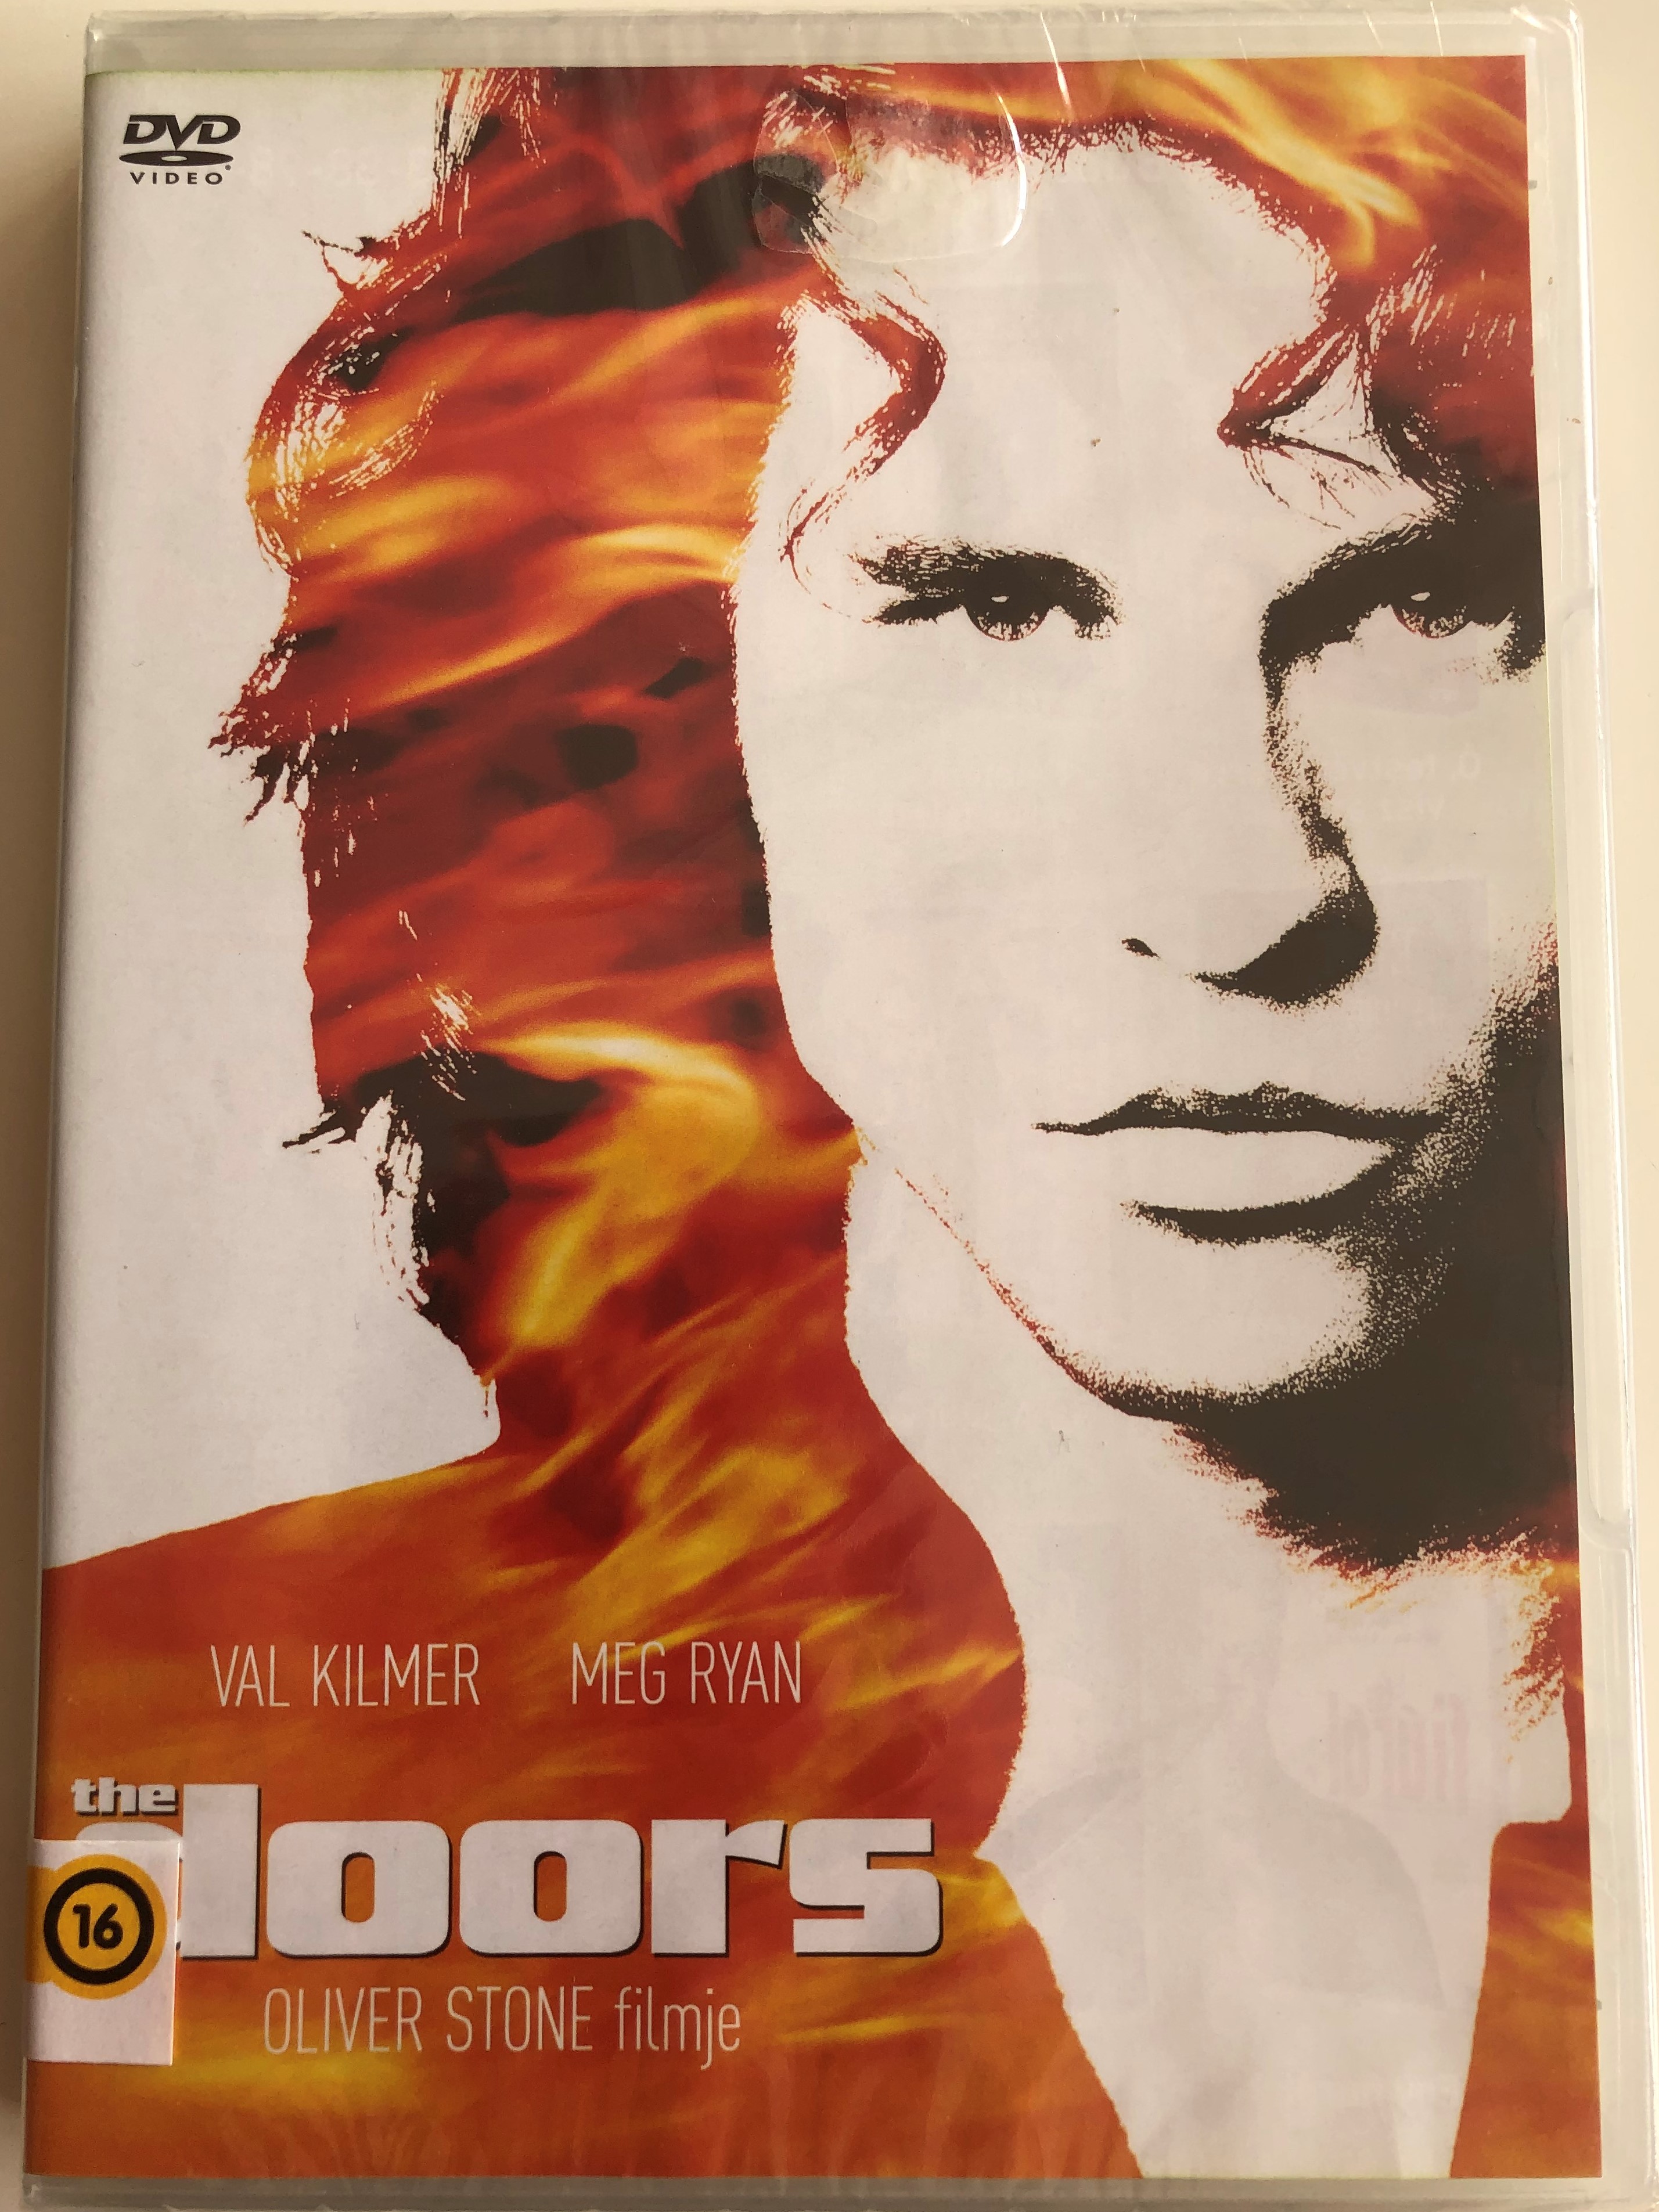 the-doors-dvd-1991-directed-by-oliver-stone-1.jpg